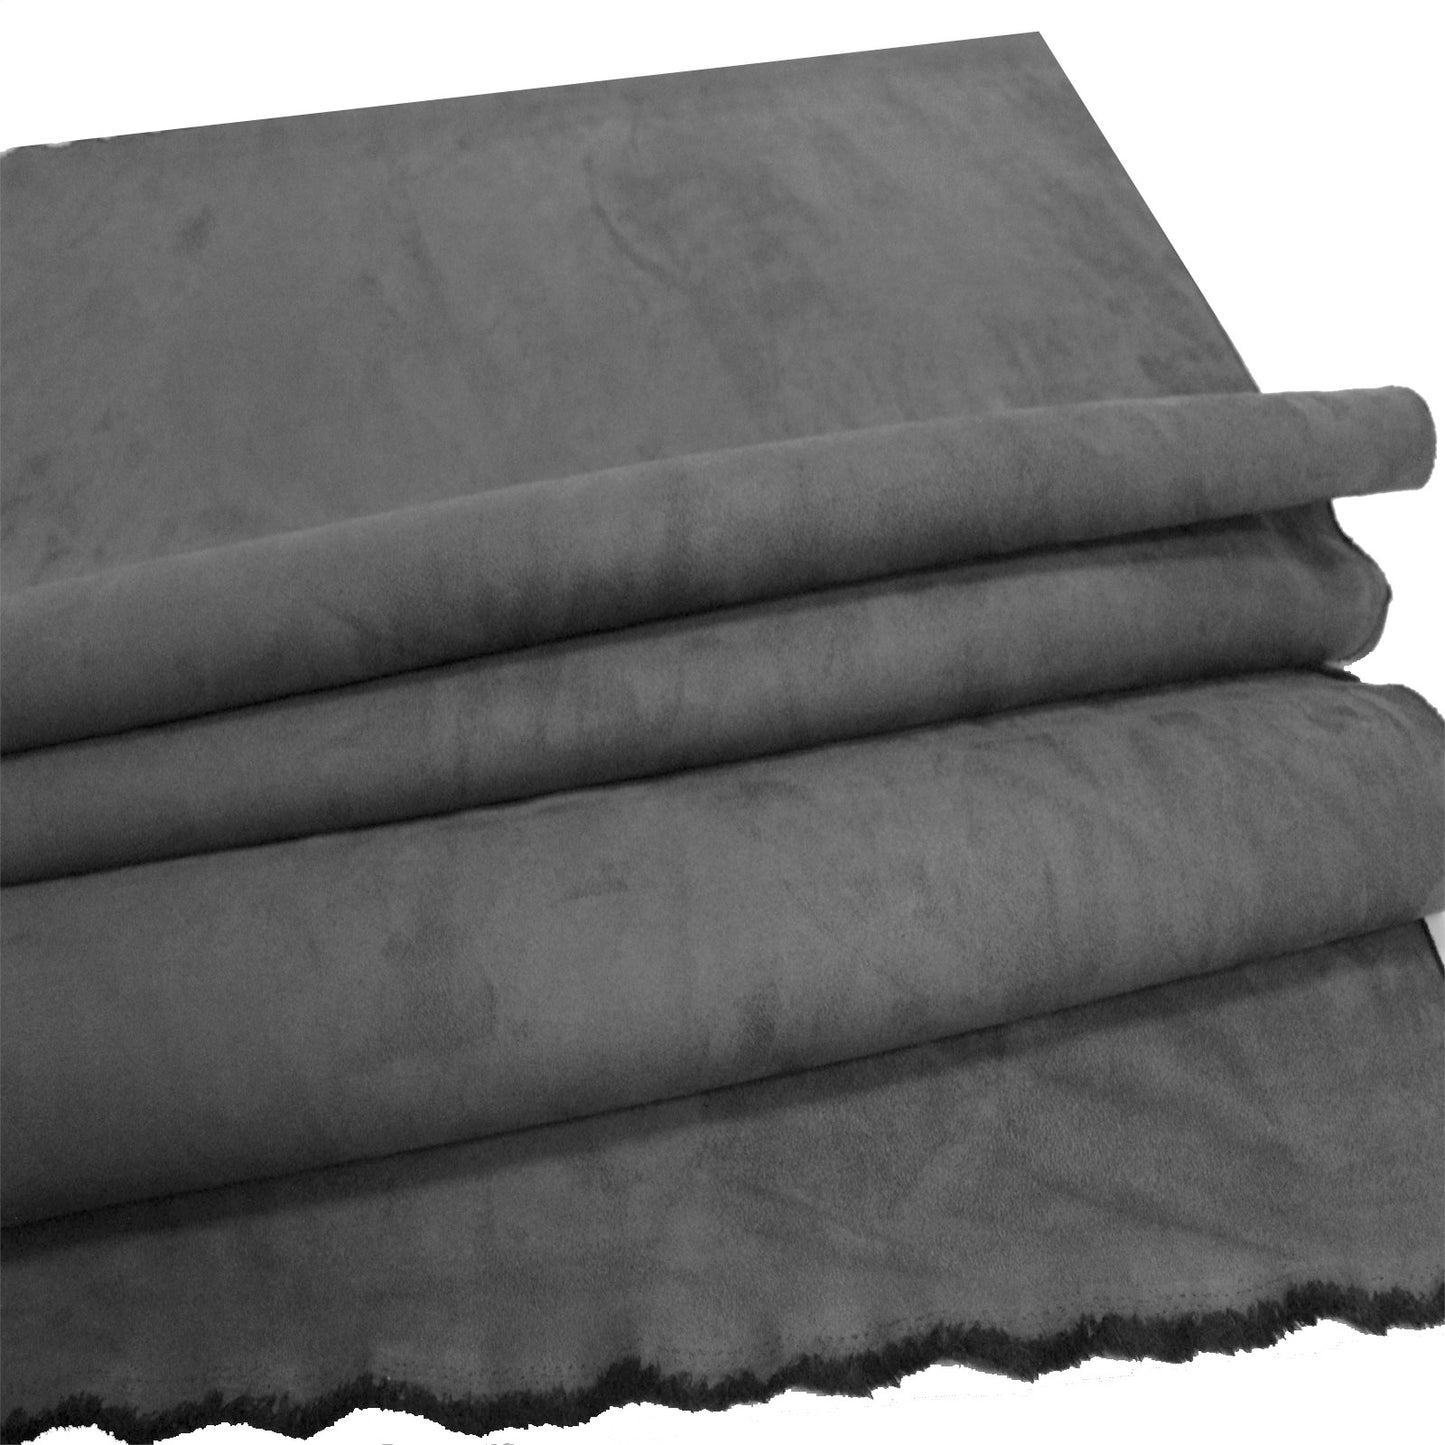 Charcoal Suede Microsuede Fabric Upholstery Drapery Fabric (10 Yards)